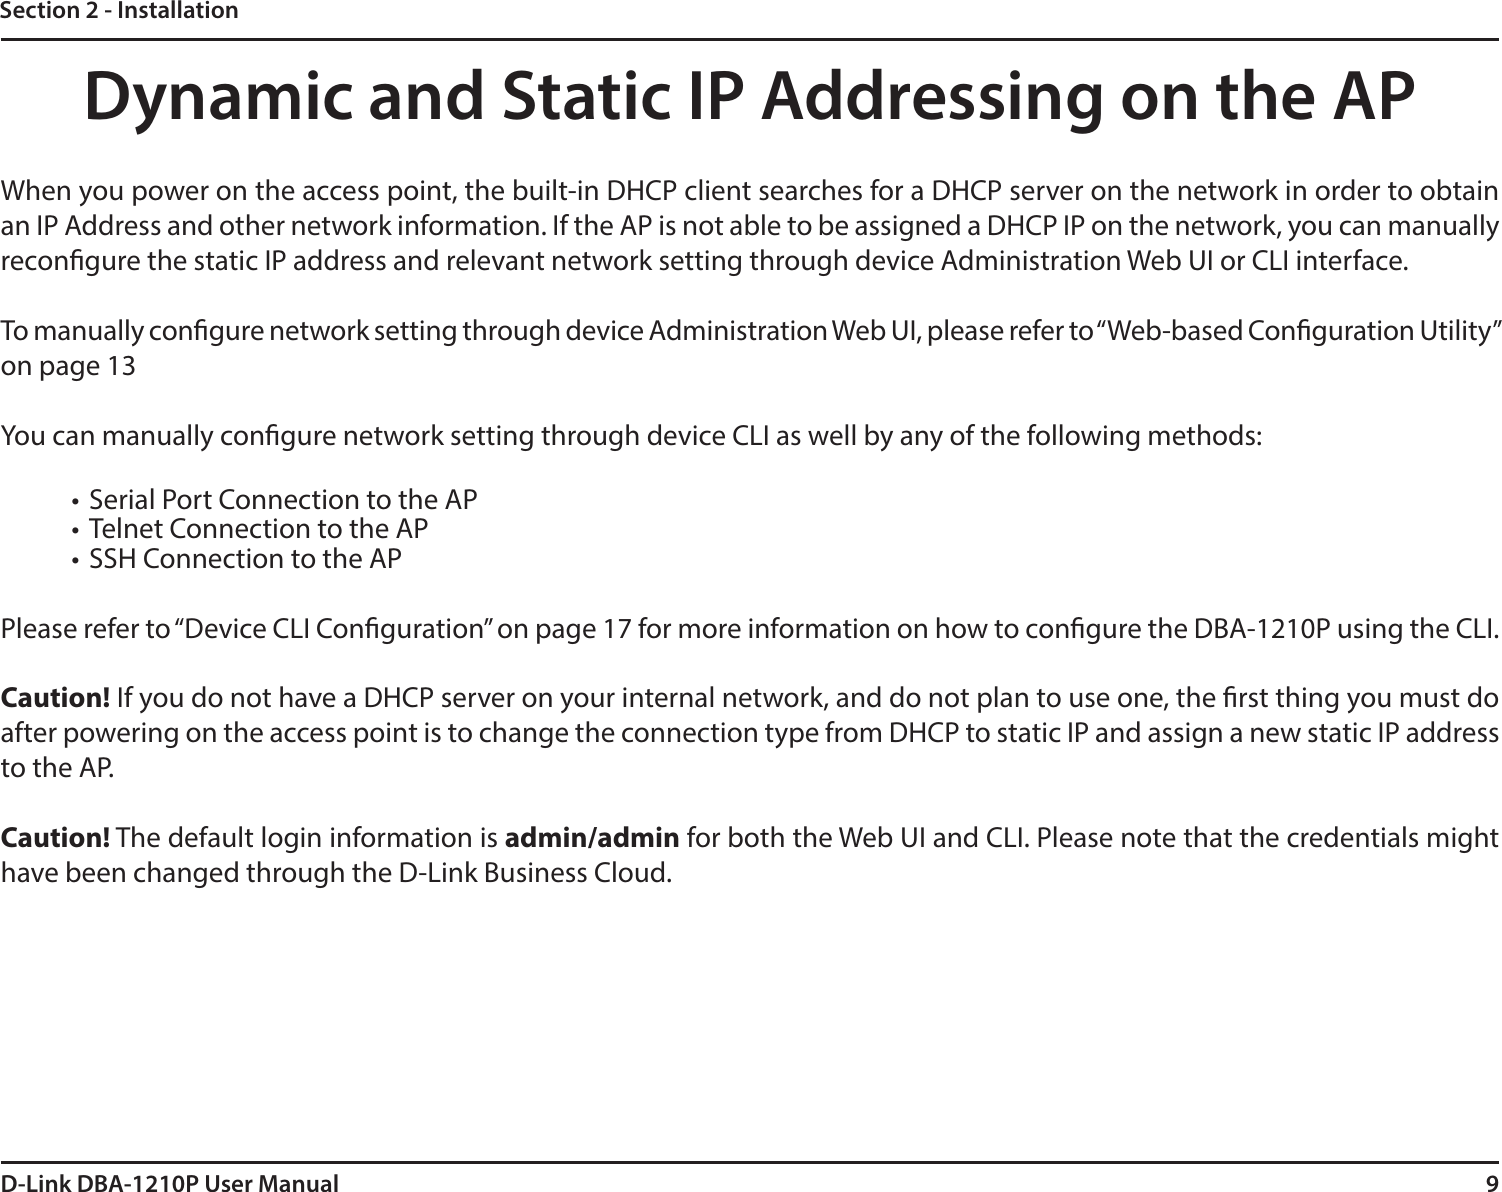 9D-Link DBA-1210P User ManualSection 2 - InstallationDynamic and Static IP Addressing on the APWhen you power on the access point, the built-in DHCP client searches for a DHCP server on the network in order to obtain an IP Address and other network information. If the AP is not able to be assigned a DHCP IP on the network, you can manually recongure the static IP address and relevant network setting through device Administration Web UI or CLI interface.To manually congure network setting through device Administration Web UI, please refer to “Web-based Conguration Utility” on page 13You can manually congure network setting through device CLI as well by any of the following methods:• Serial Port Connection to the AP • Telnet Connection to the AP • SSH Connection to the APPlease refer to “Device CLI Conguration” on page 17 for more information on how to congure the DBA-1210P using the CLI.Caution! If you do not have a DHCP server on your internal network, and do not plan to use one, the rst thing you must do after powering on the access point is to change the connection type from DHCP to static IP and assign a new static IP address to the AP.Caution! The default login information is admin/admin for both the Web UI and CLI. Please note that the credentials might have been changed through the D-Link Business Cloud.